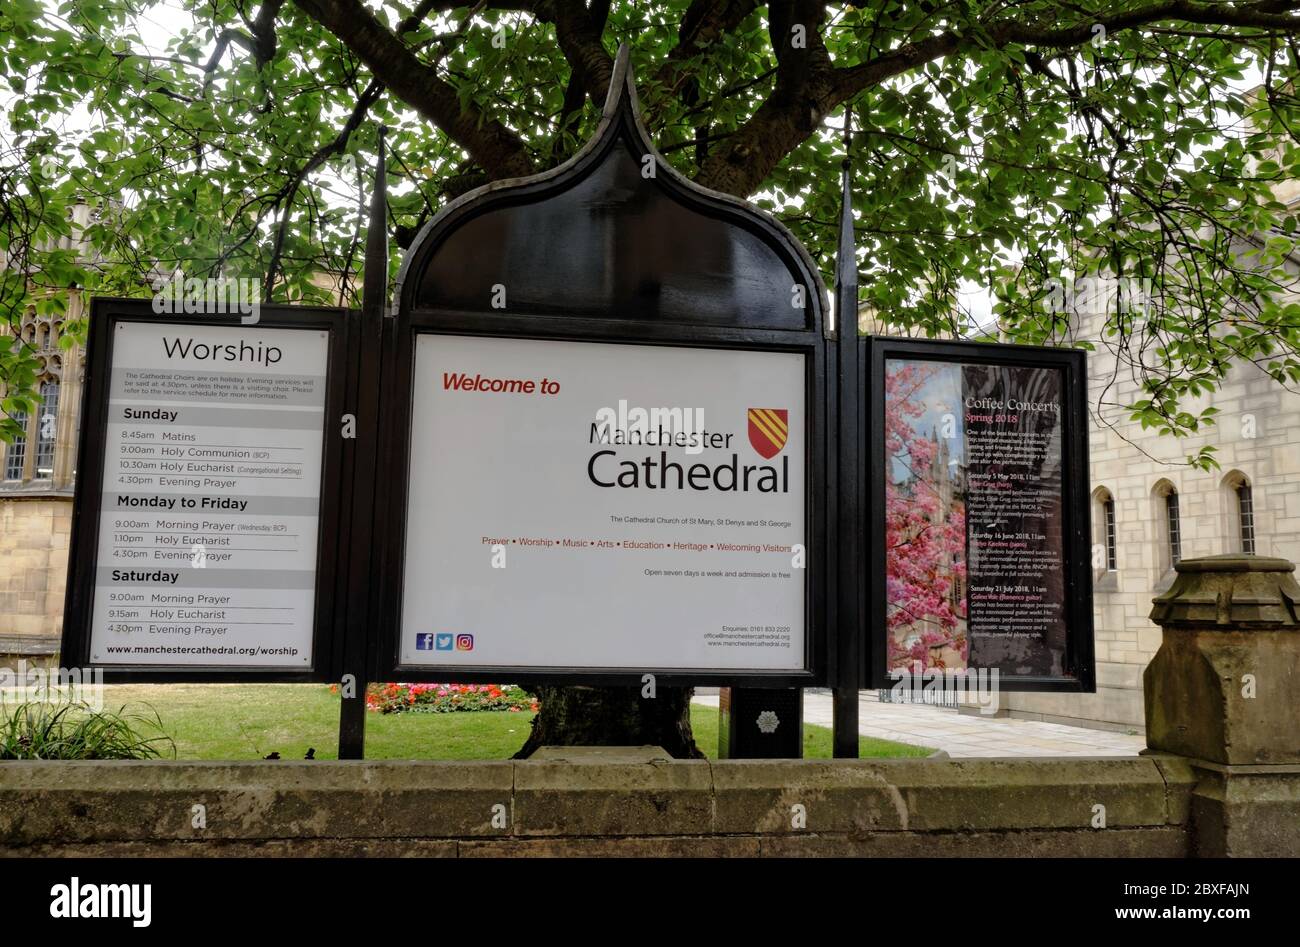 Welcome to Manchester Cathedral sign. Prayer, worship, music, arts, education, heritage and welcoming visitors. Times of worship. Coffee concerts. Stock Photo